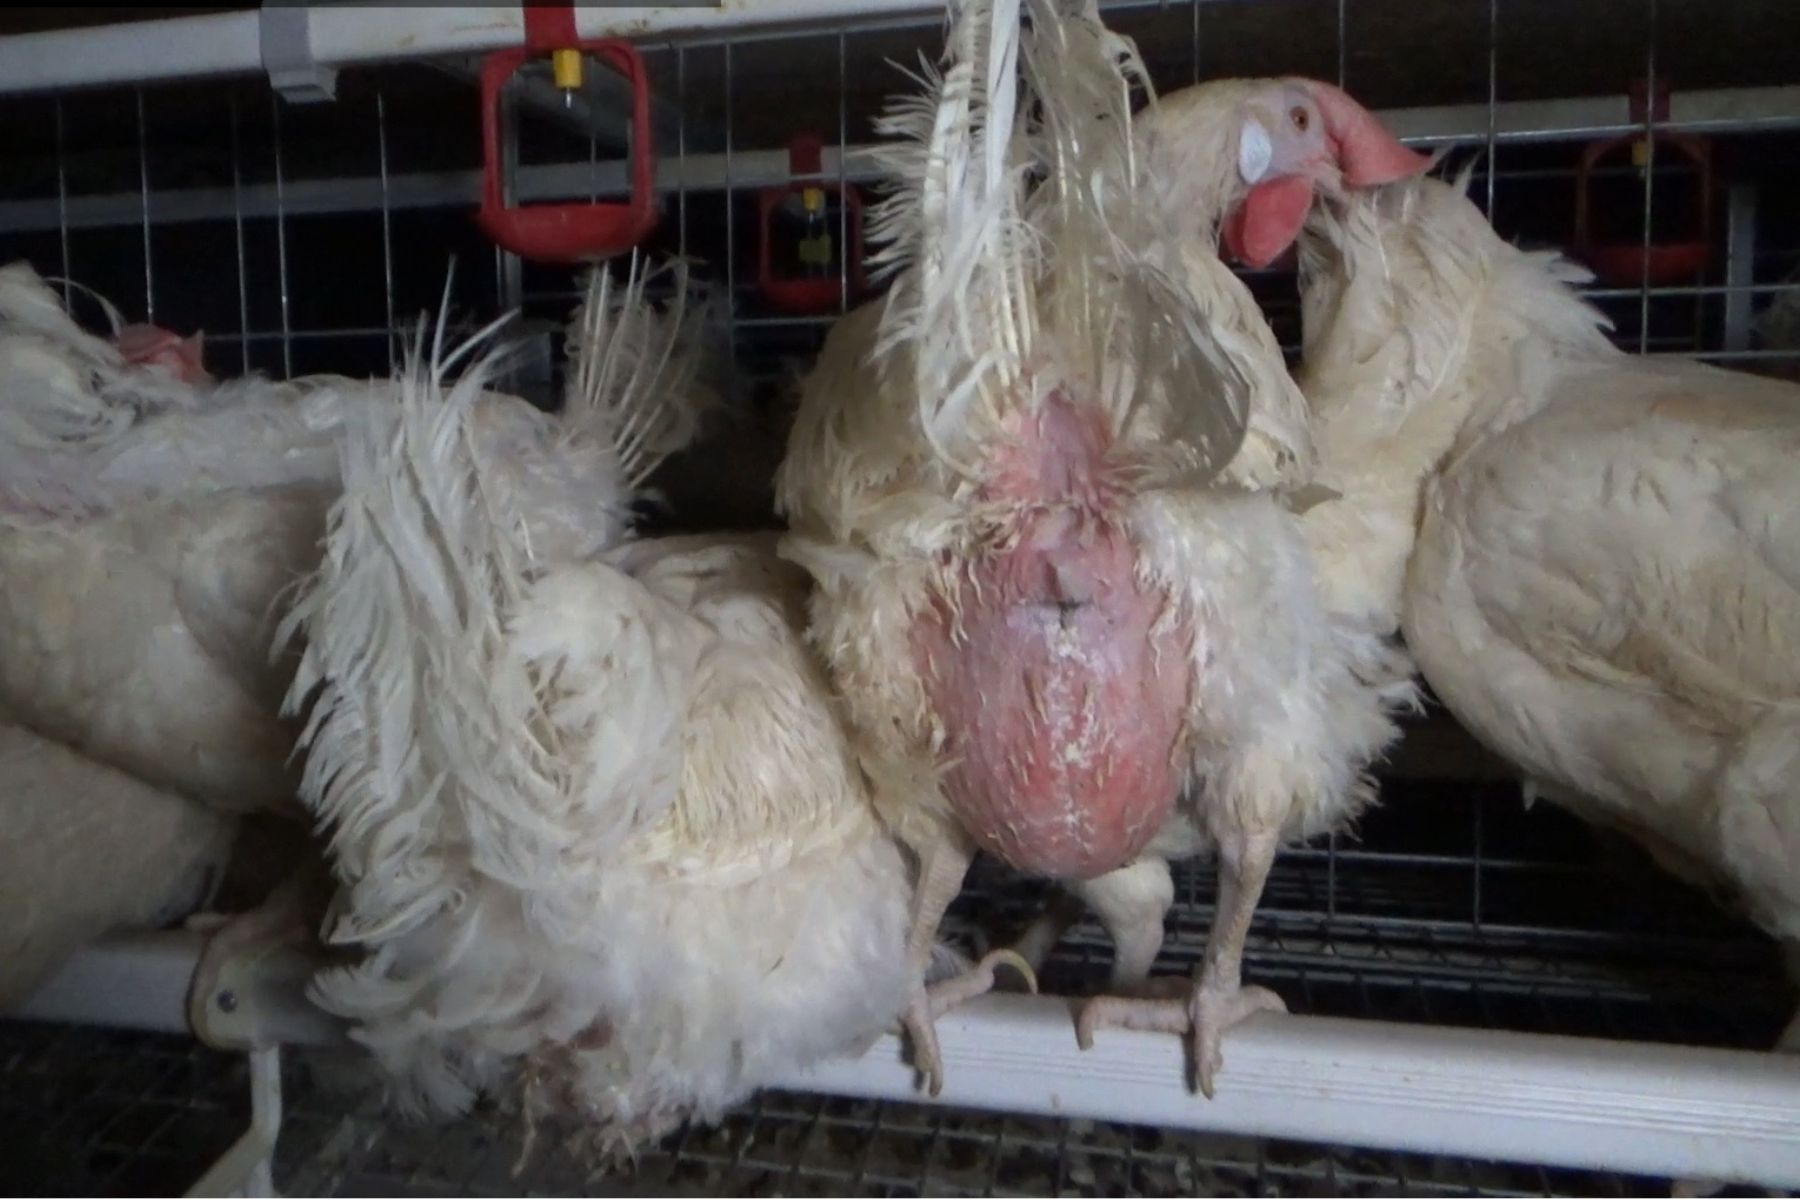 Egg laying hens in cages suffer from severe feather loss.